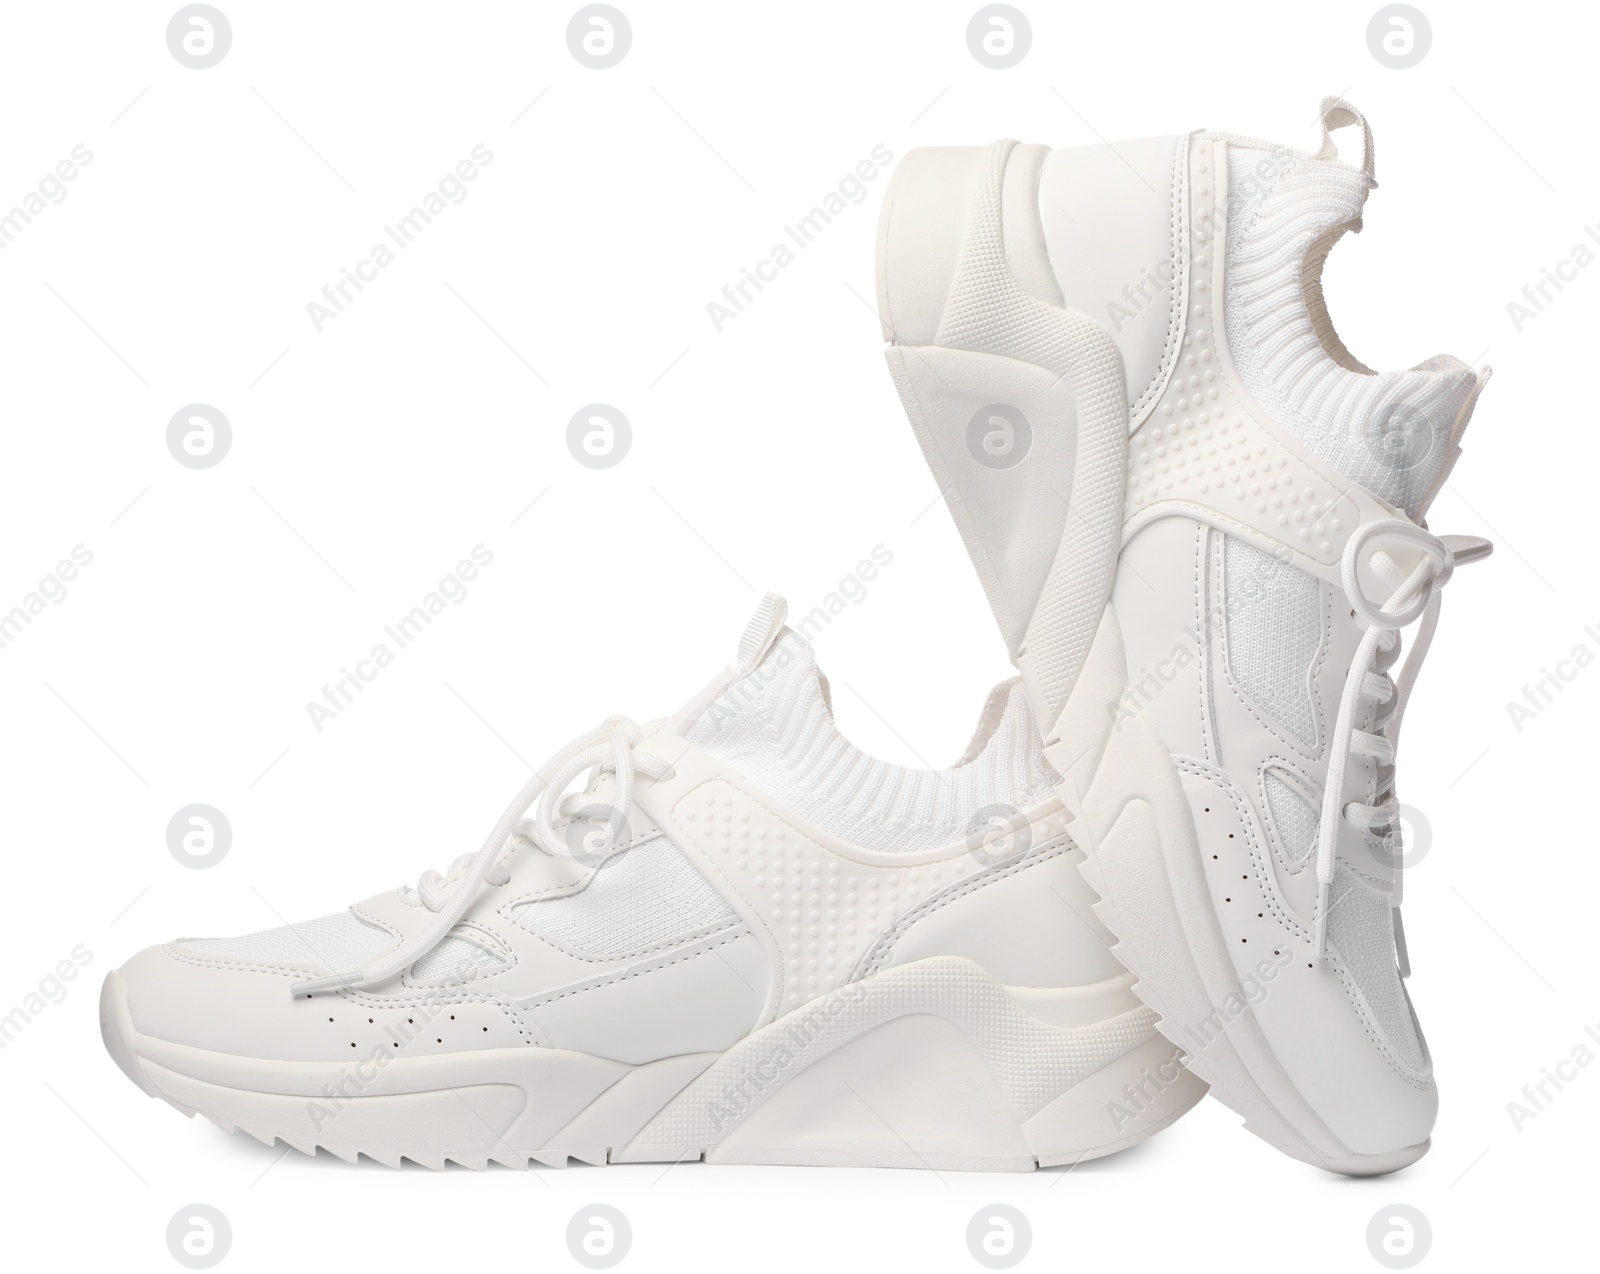 Photo of Pair of stylish sneakers isolated on white